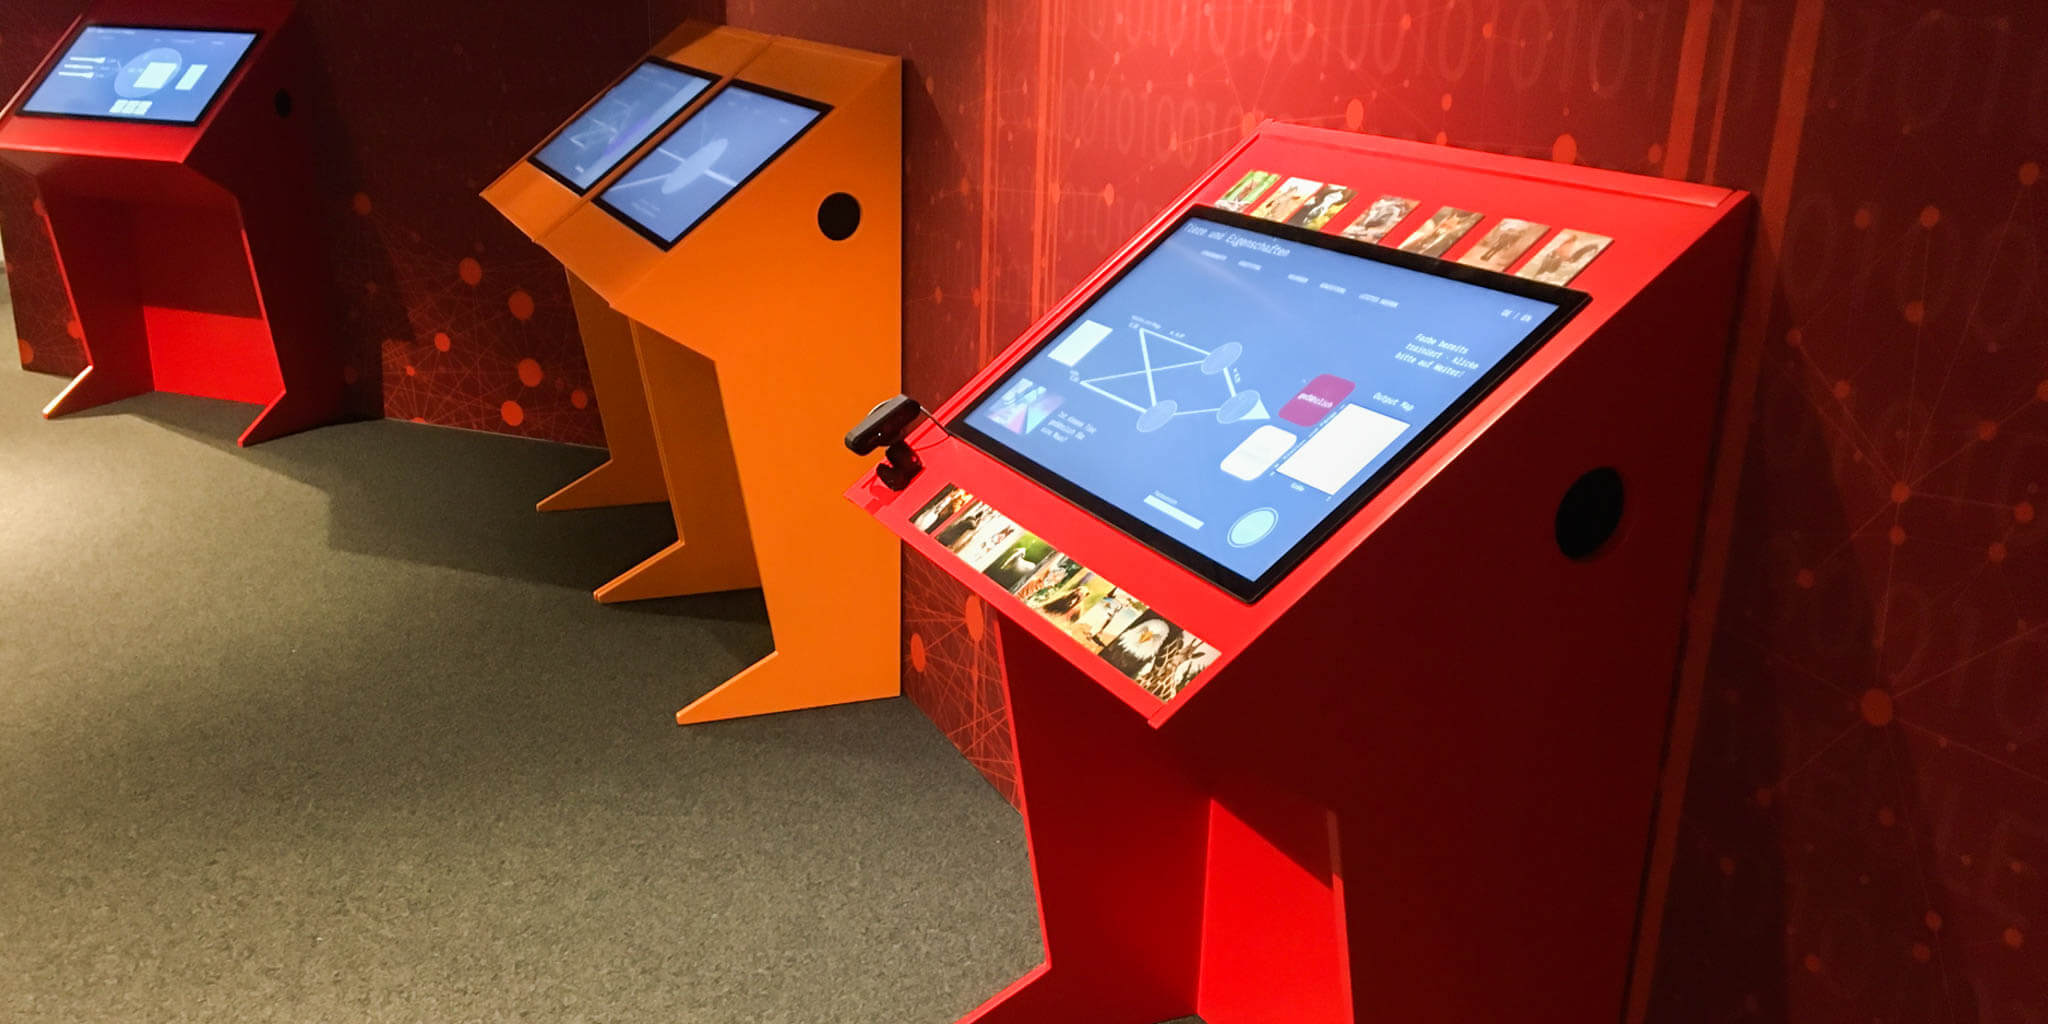 Mission AI: Experience, understand and shape artificial intelligence at the Deutsches Museum Bonn